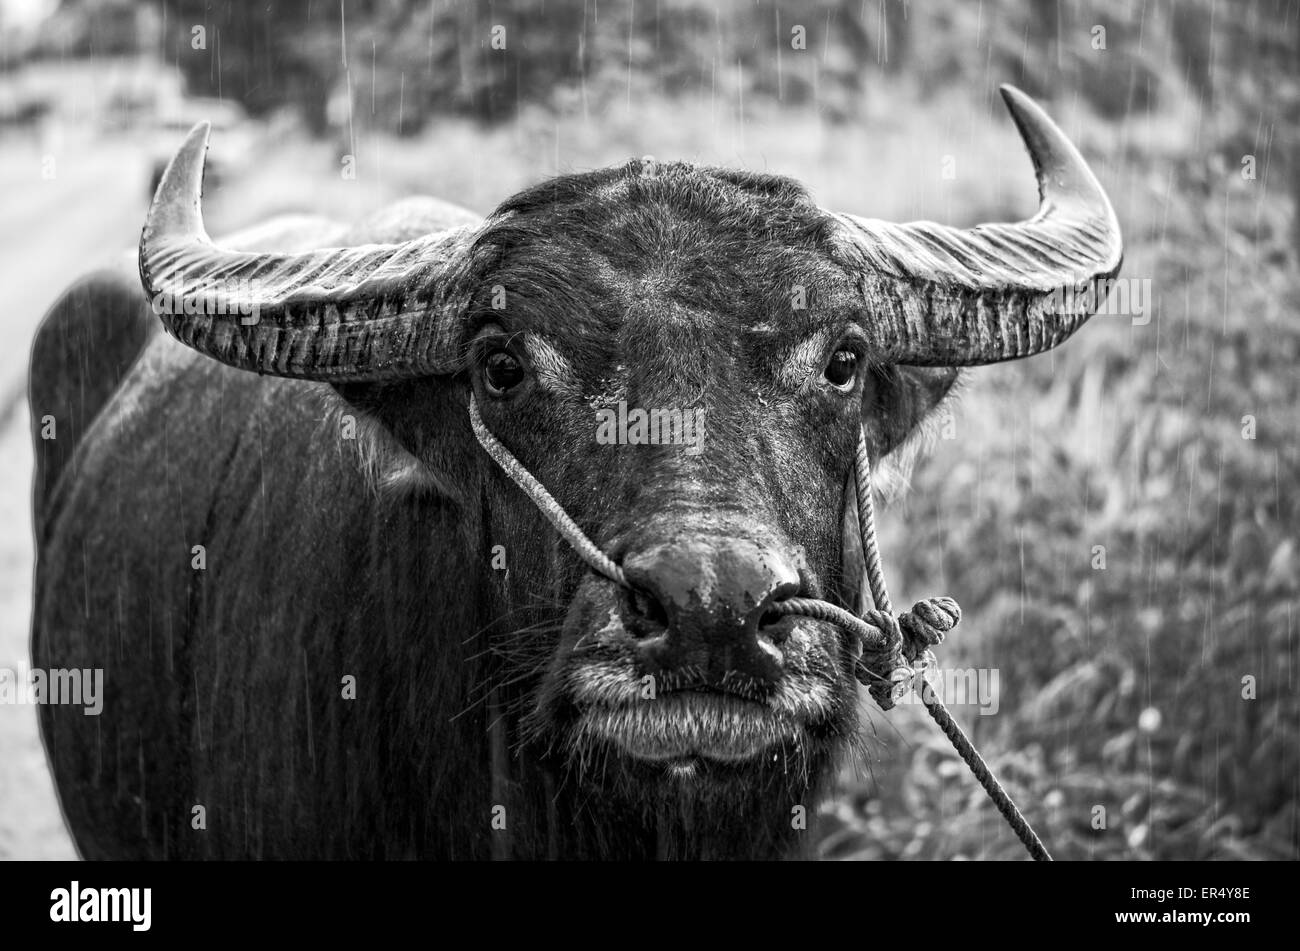 Black and white photo, close up front face of Asian Water Buffalo or Bubalus bubalis in the rain, Thailand Stock Photo